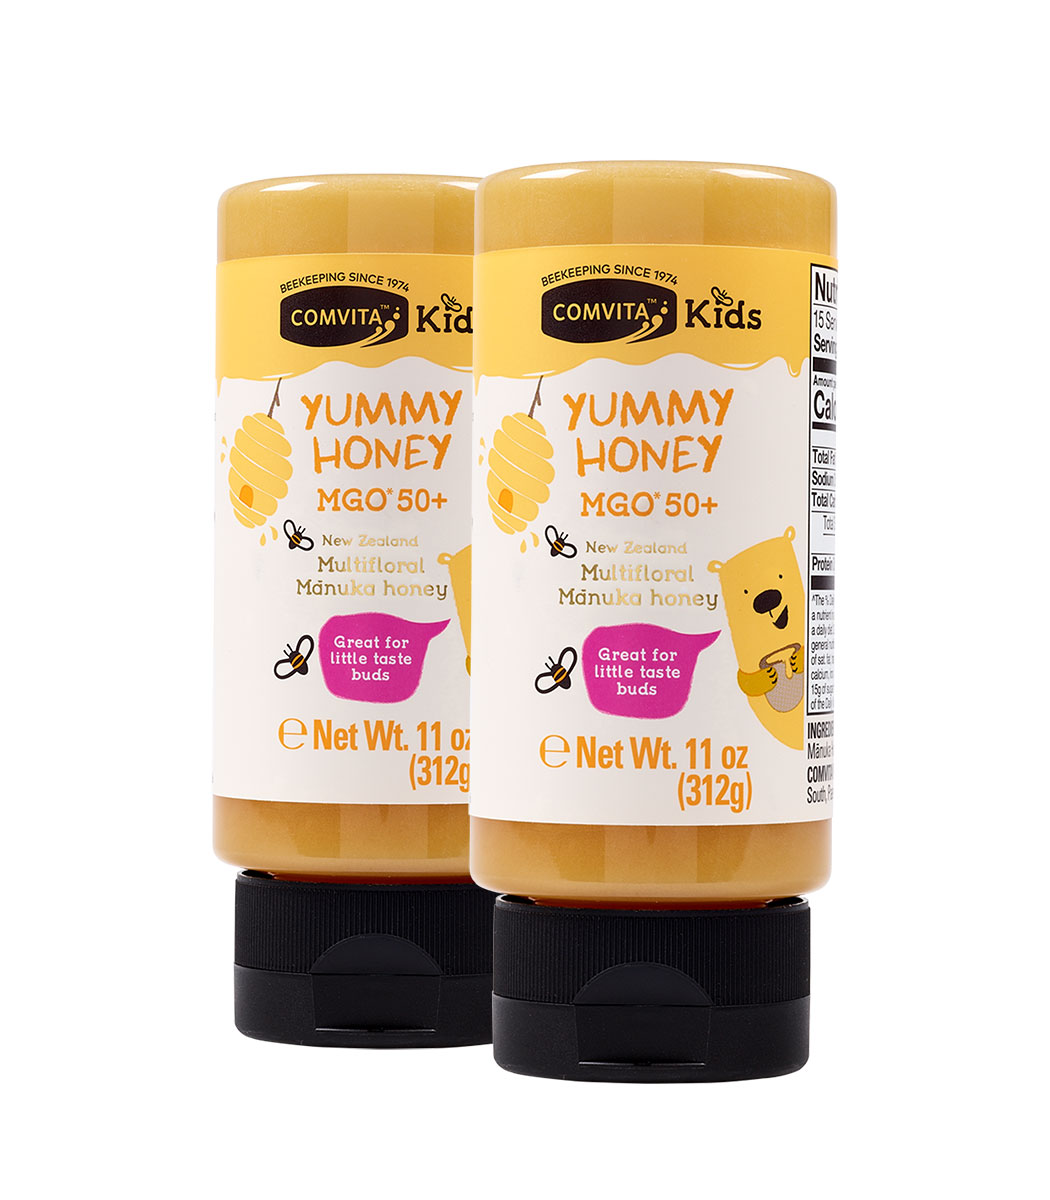 Buy One Yummy Honey Squeeze Bottle, Get One FREE!